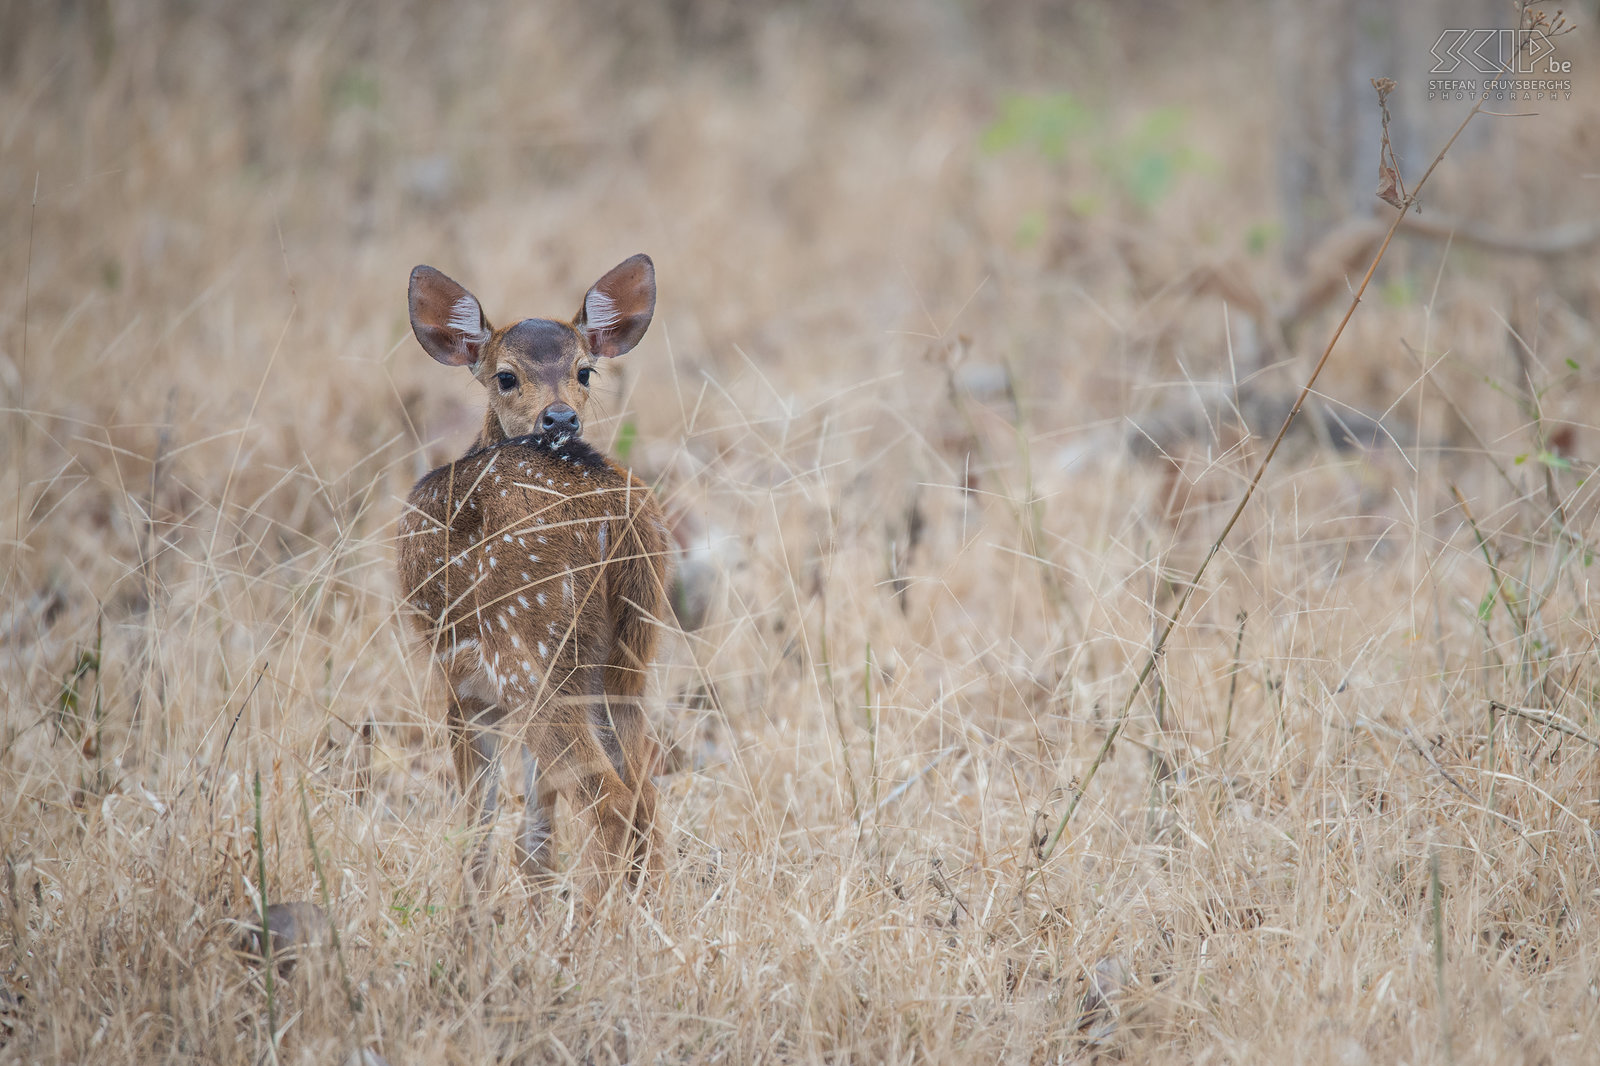 Kabini - Juvenile spotted deer Kabini National Park in Karnataka is the home of many herds of spotted deers (Axis deer, Chital, Axis axis). Predators of the chital include tigers, leopards, dholes, ... Stefan Cruysberghs